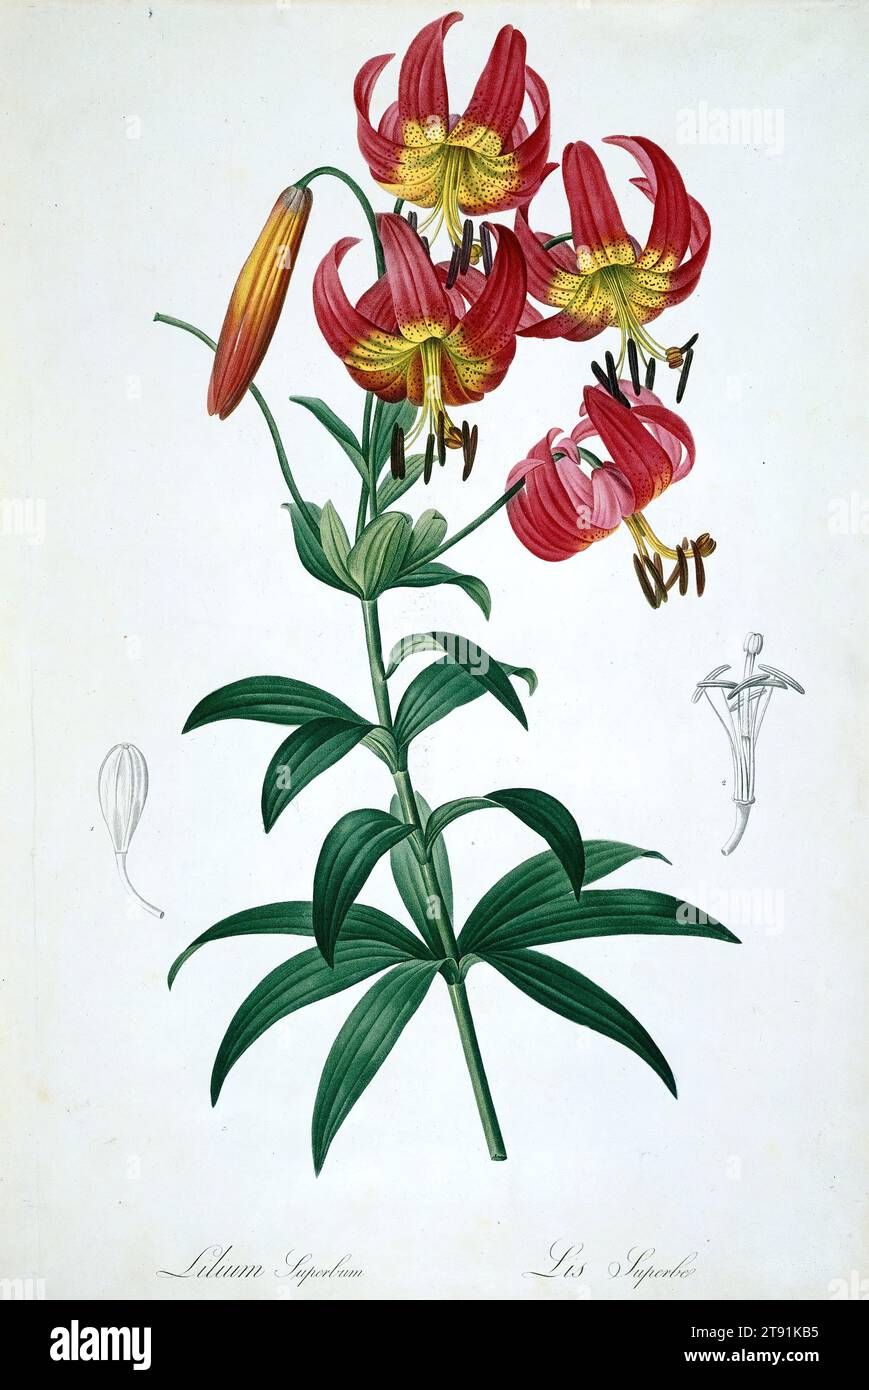 Lilium superbum (Superb Lily), 1805, de Gouy; Artist: After Pierre-Joseph Redouté, French, Flemish (active France), 1759–1840, 20 1/8 x 13 7/8 in. (51.12 x 35.24 cm) (sheet, margins cut), Color stipple engraving with hand-coloring, Belgium, 19th century, Botanical illustrators working in the fifteenth and sixteenth centuries devoted themselves to the medicinal qualities of plants and sought to render plant structure and function as precisely as they could. Later, European explorers brought specimens back from exotic locales, and artists carefully reproduced them for an audience Stock Photo